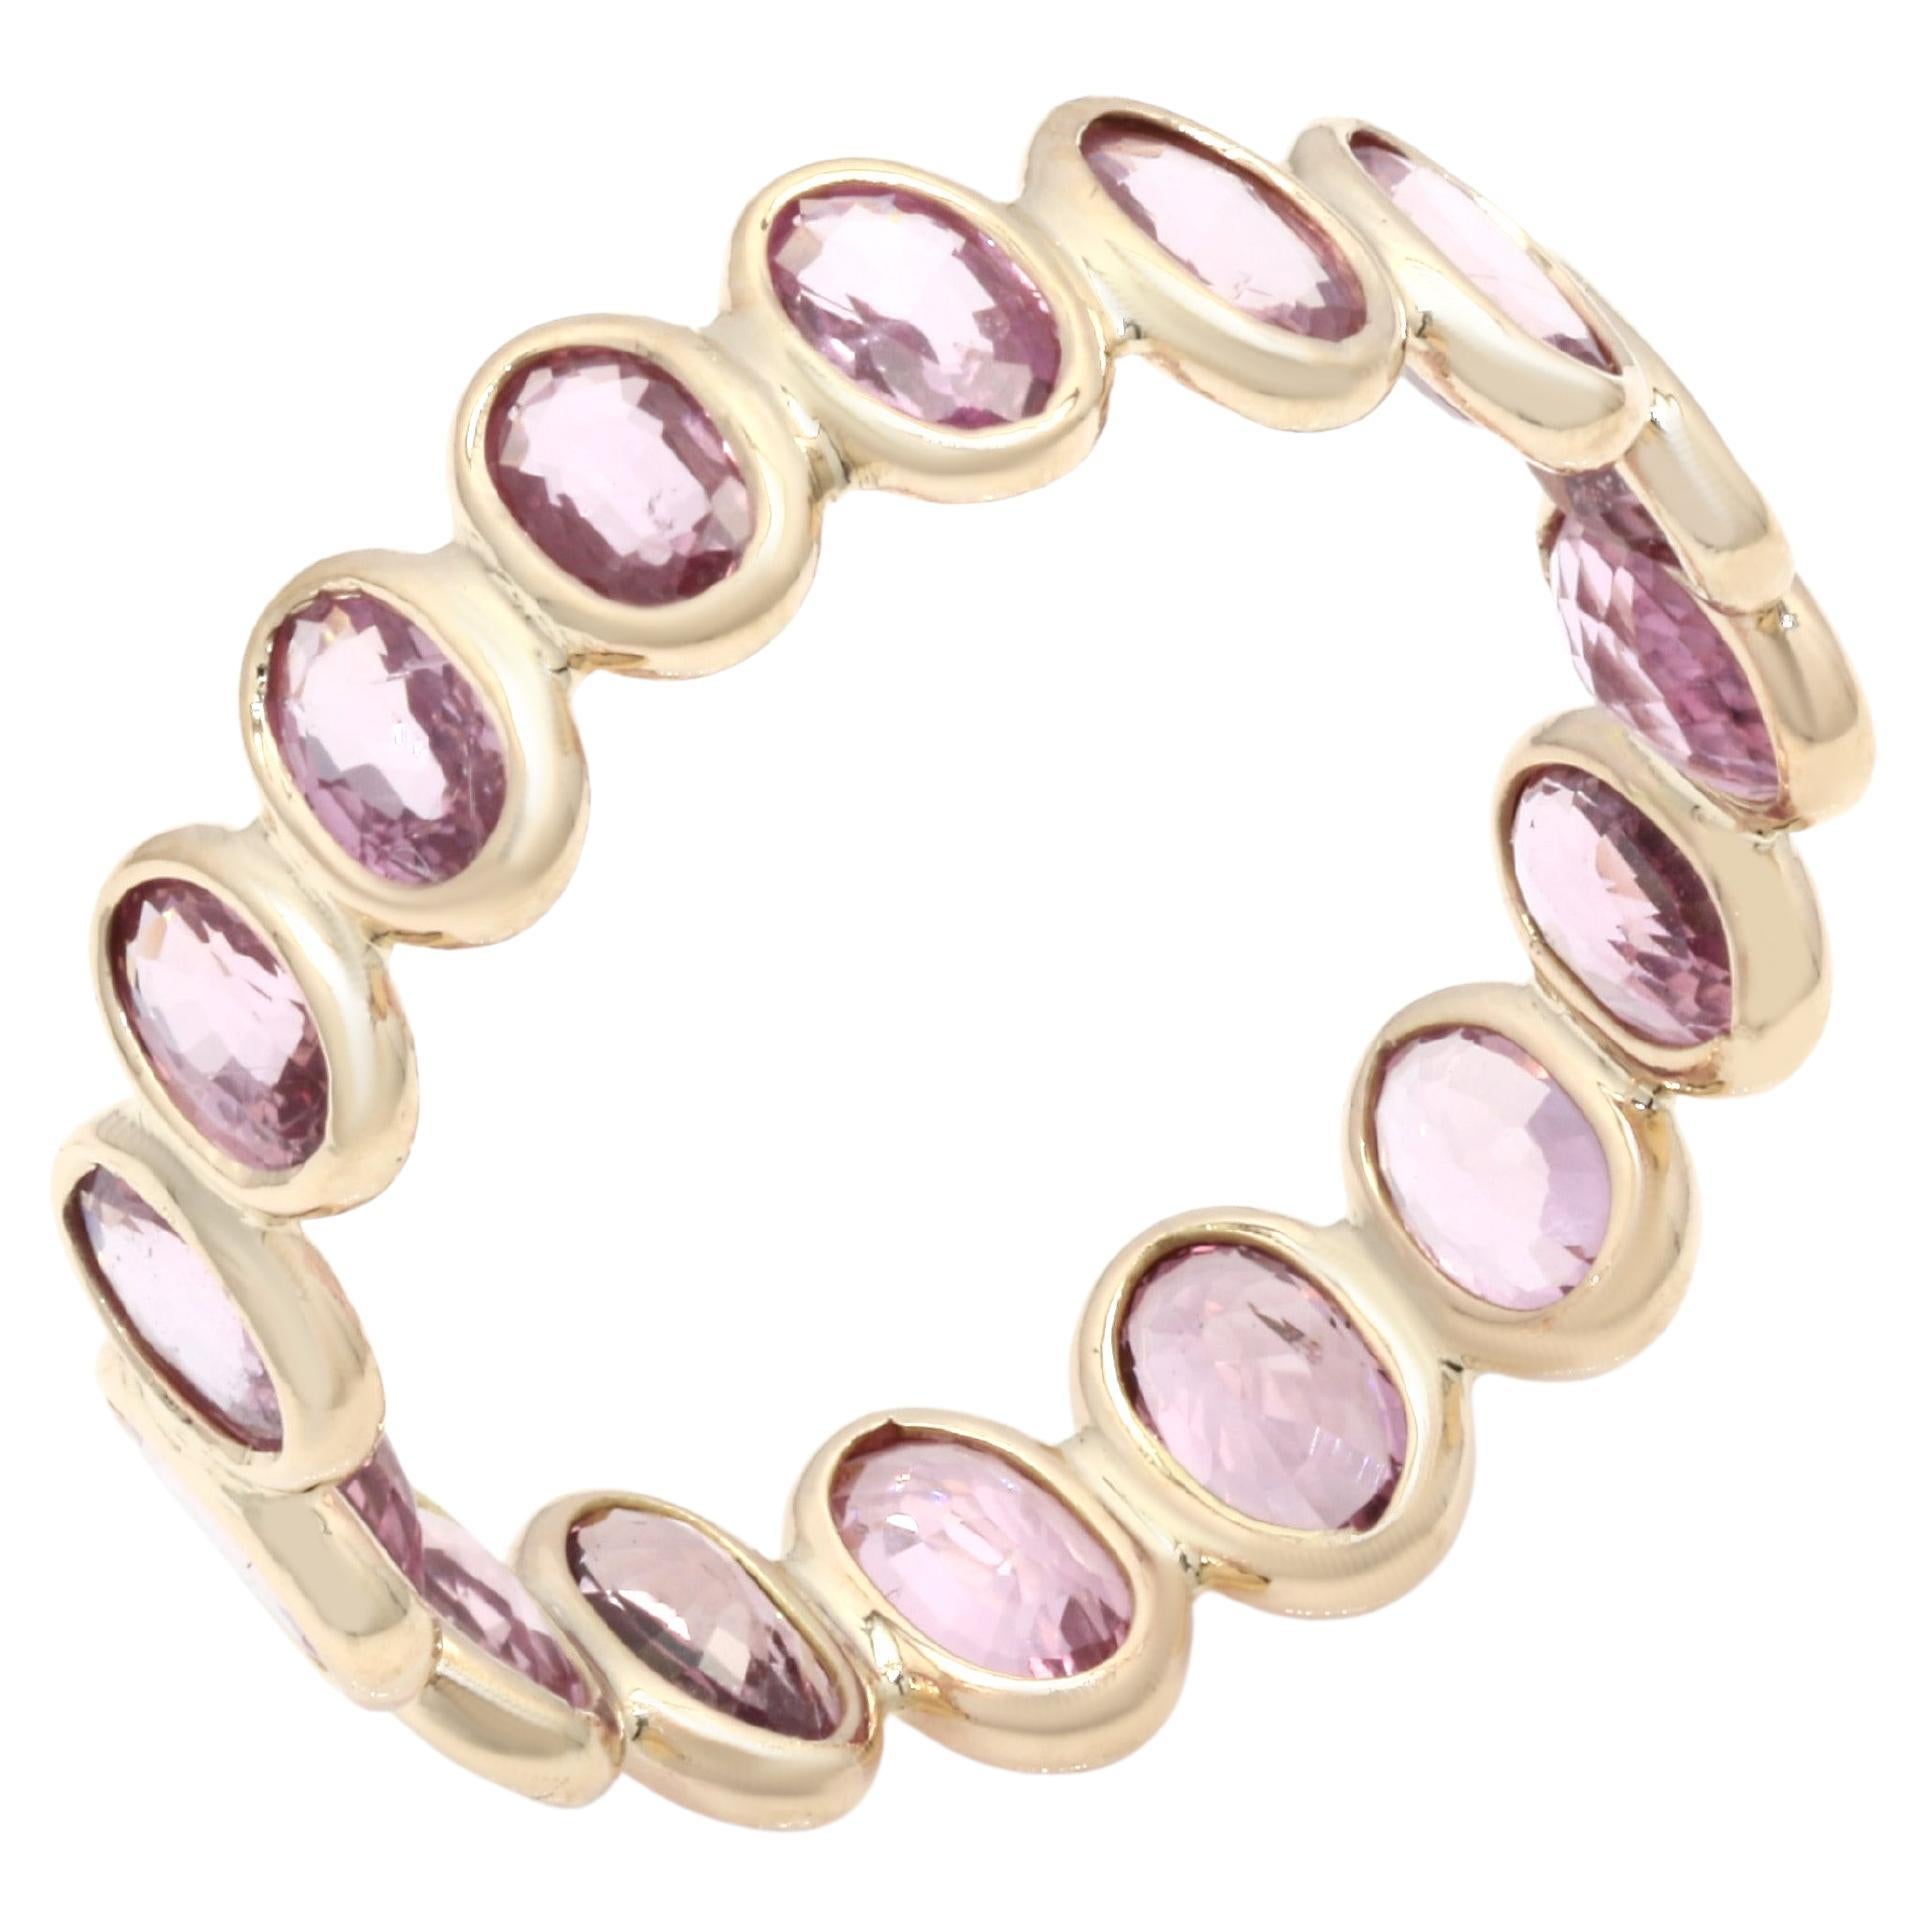 For Sale:  Handmade 4.47 Ct Oval Pink Sapphire Birthstone Eternity Ring in 14K Yellow Gold 2